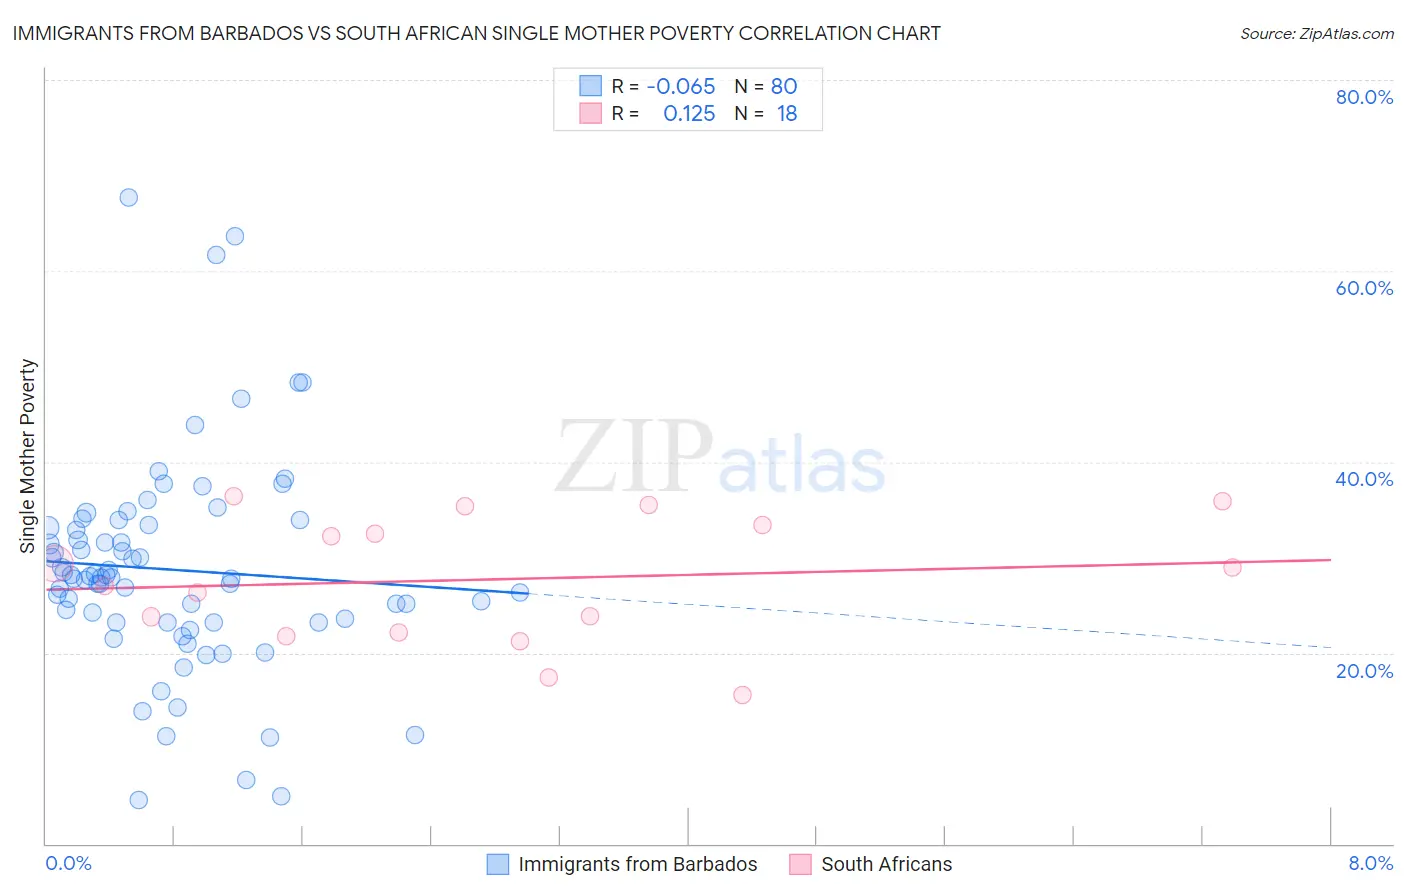 Immigrants from Barbados vs South African Single Mother Poverty